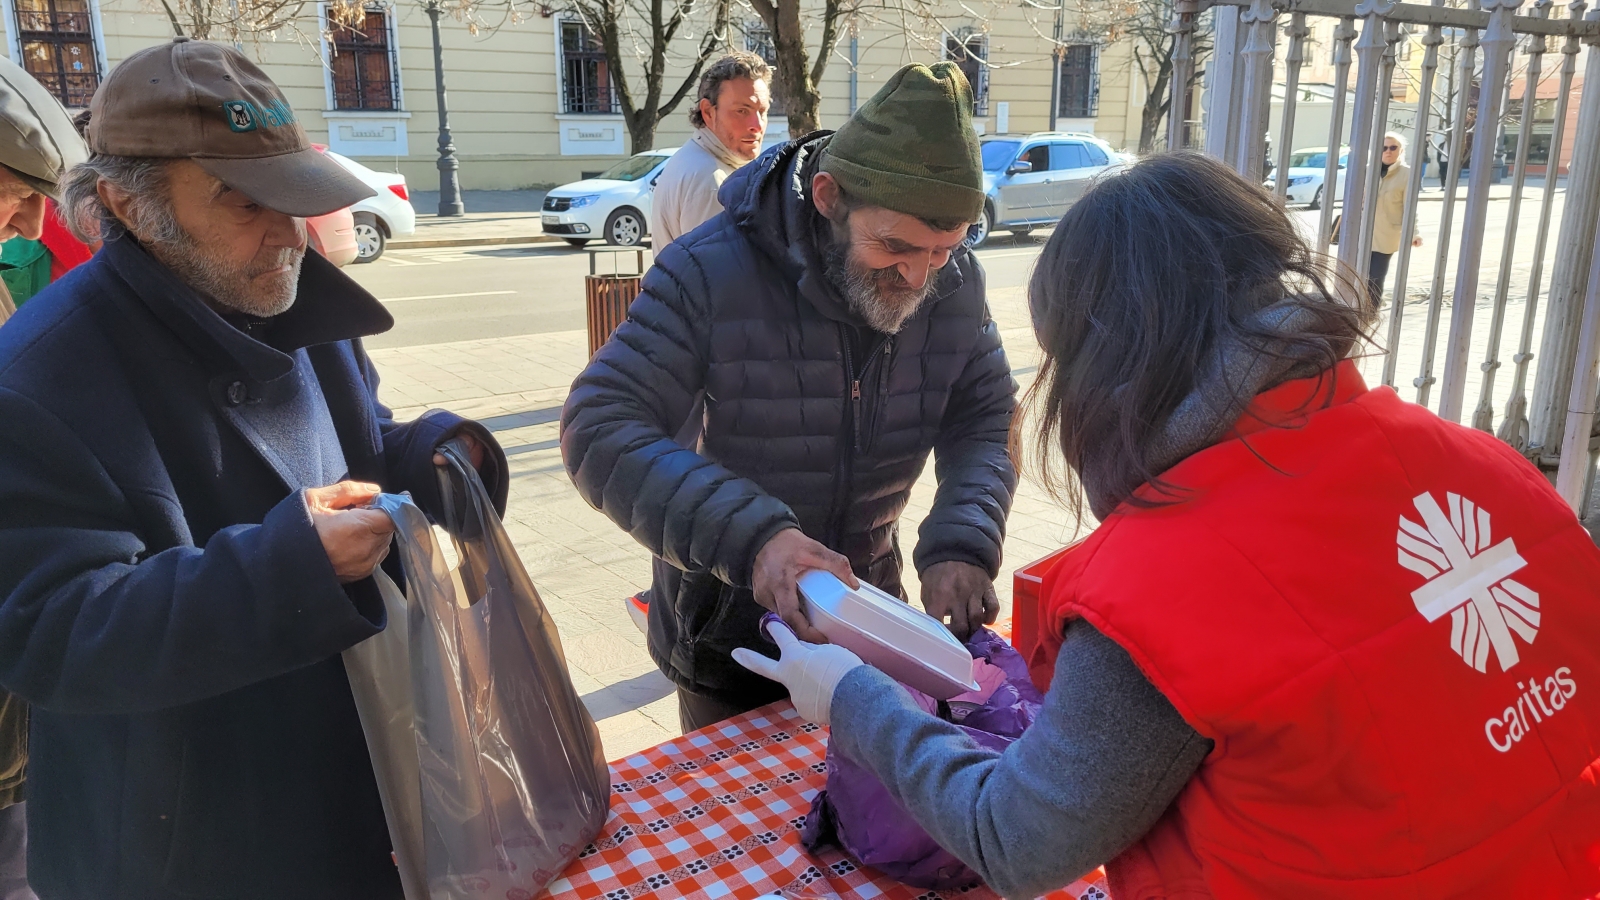 We distributed 1200 hot meals on streets of Oradea